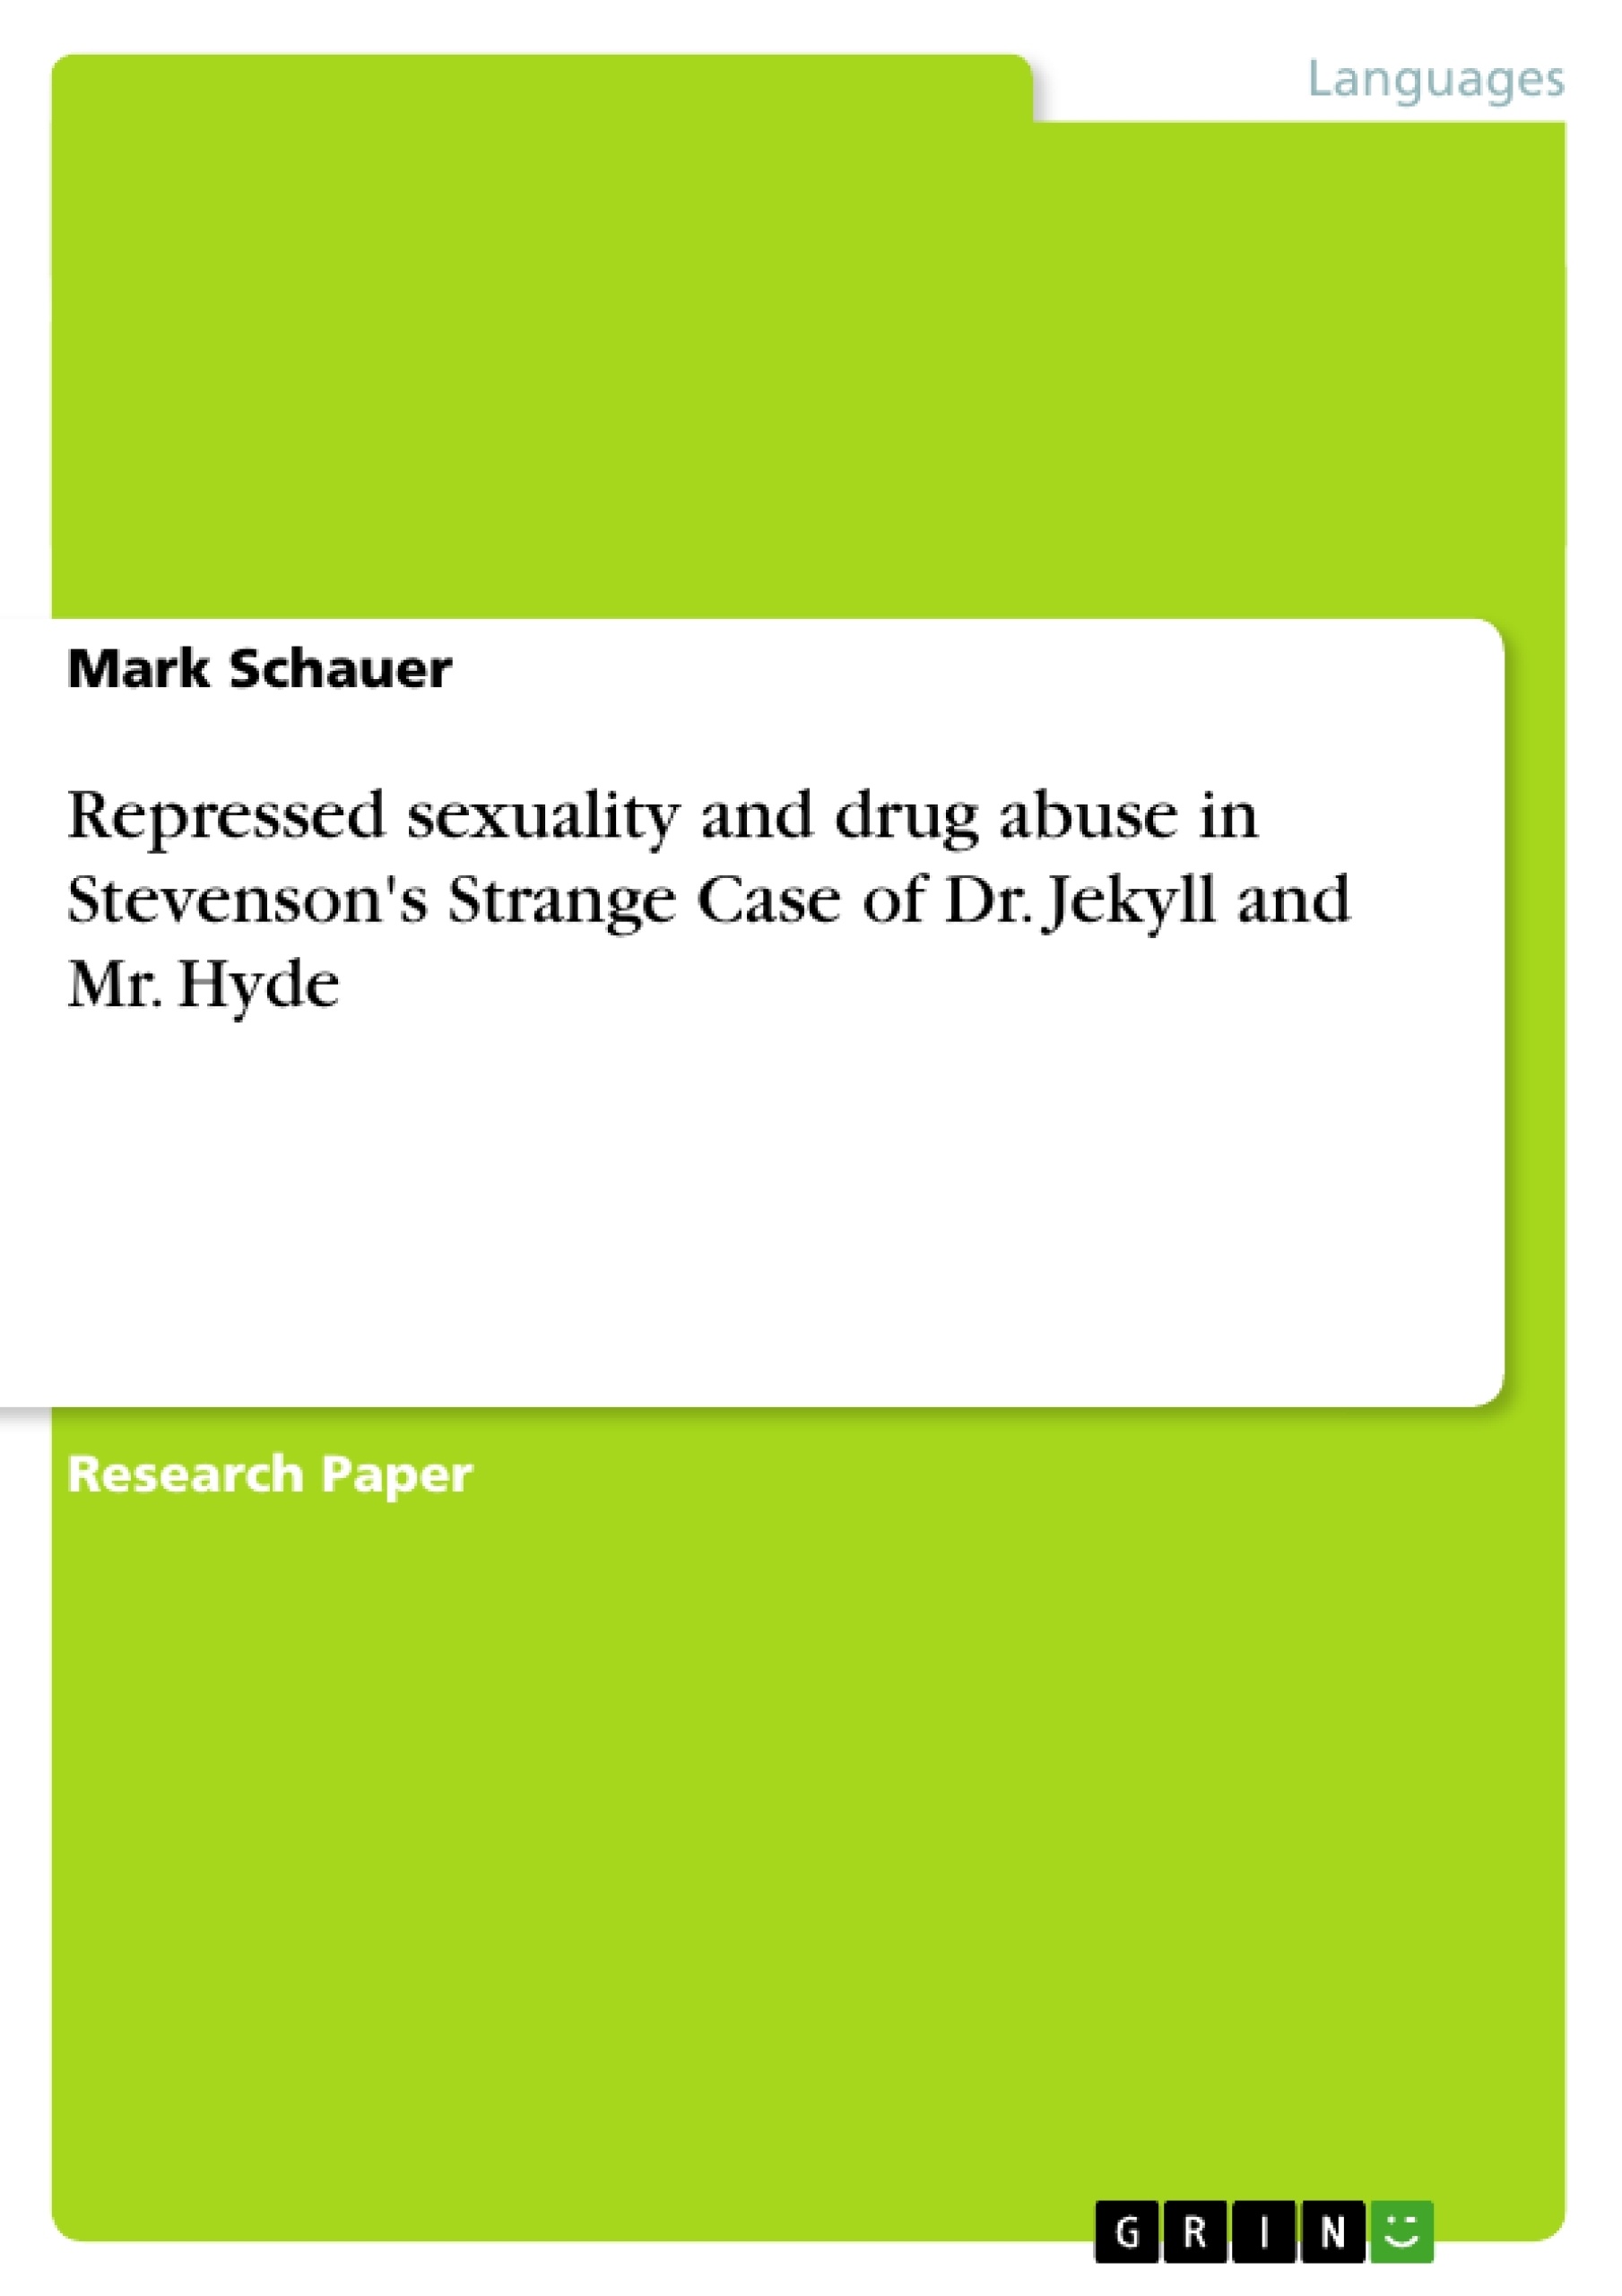 Title: Repressed sexuality and drug abuse in Stevenson's Strange Case of Dr. Jekyll and Mr. Hyde